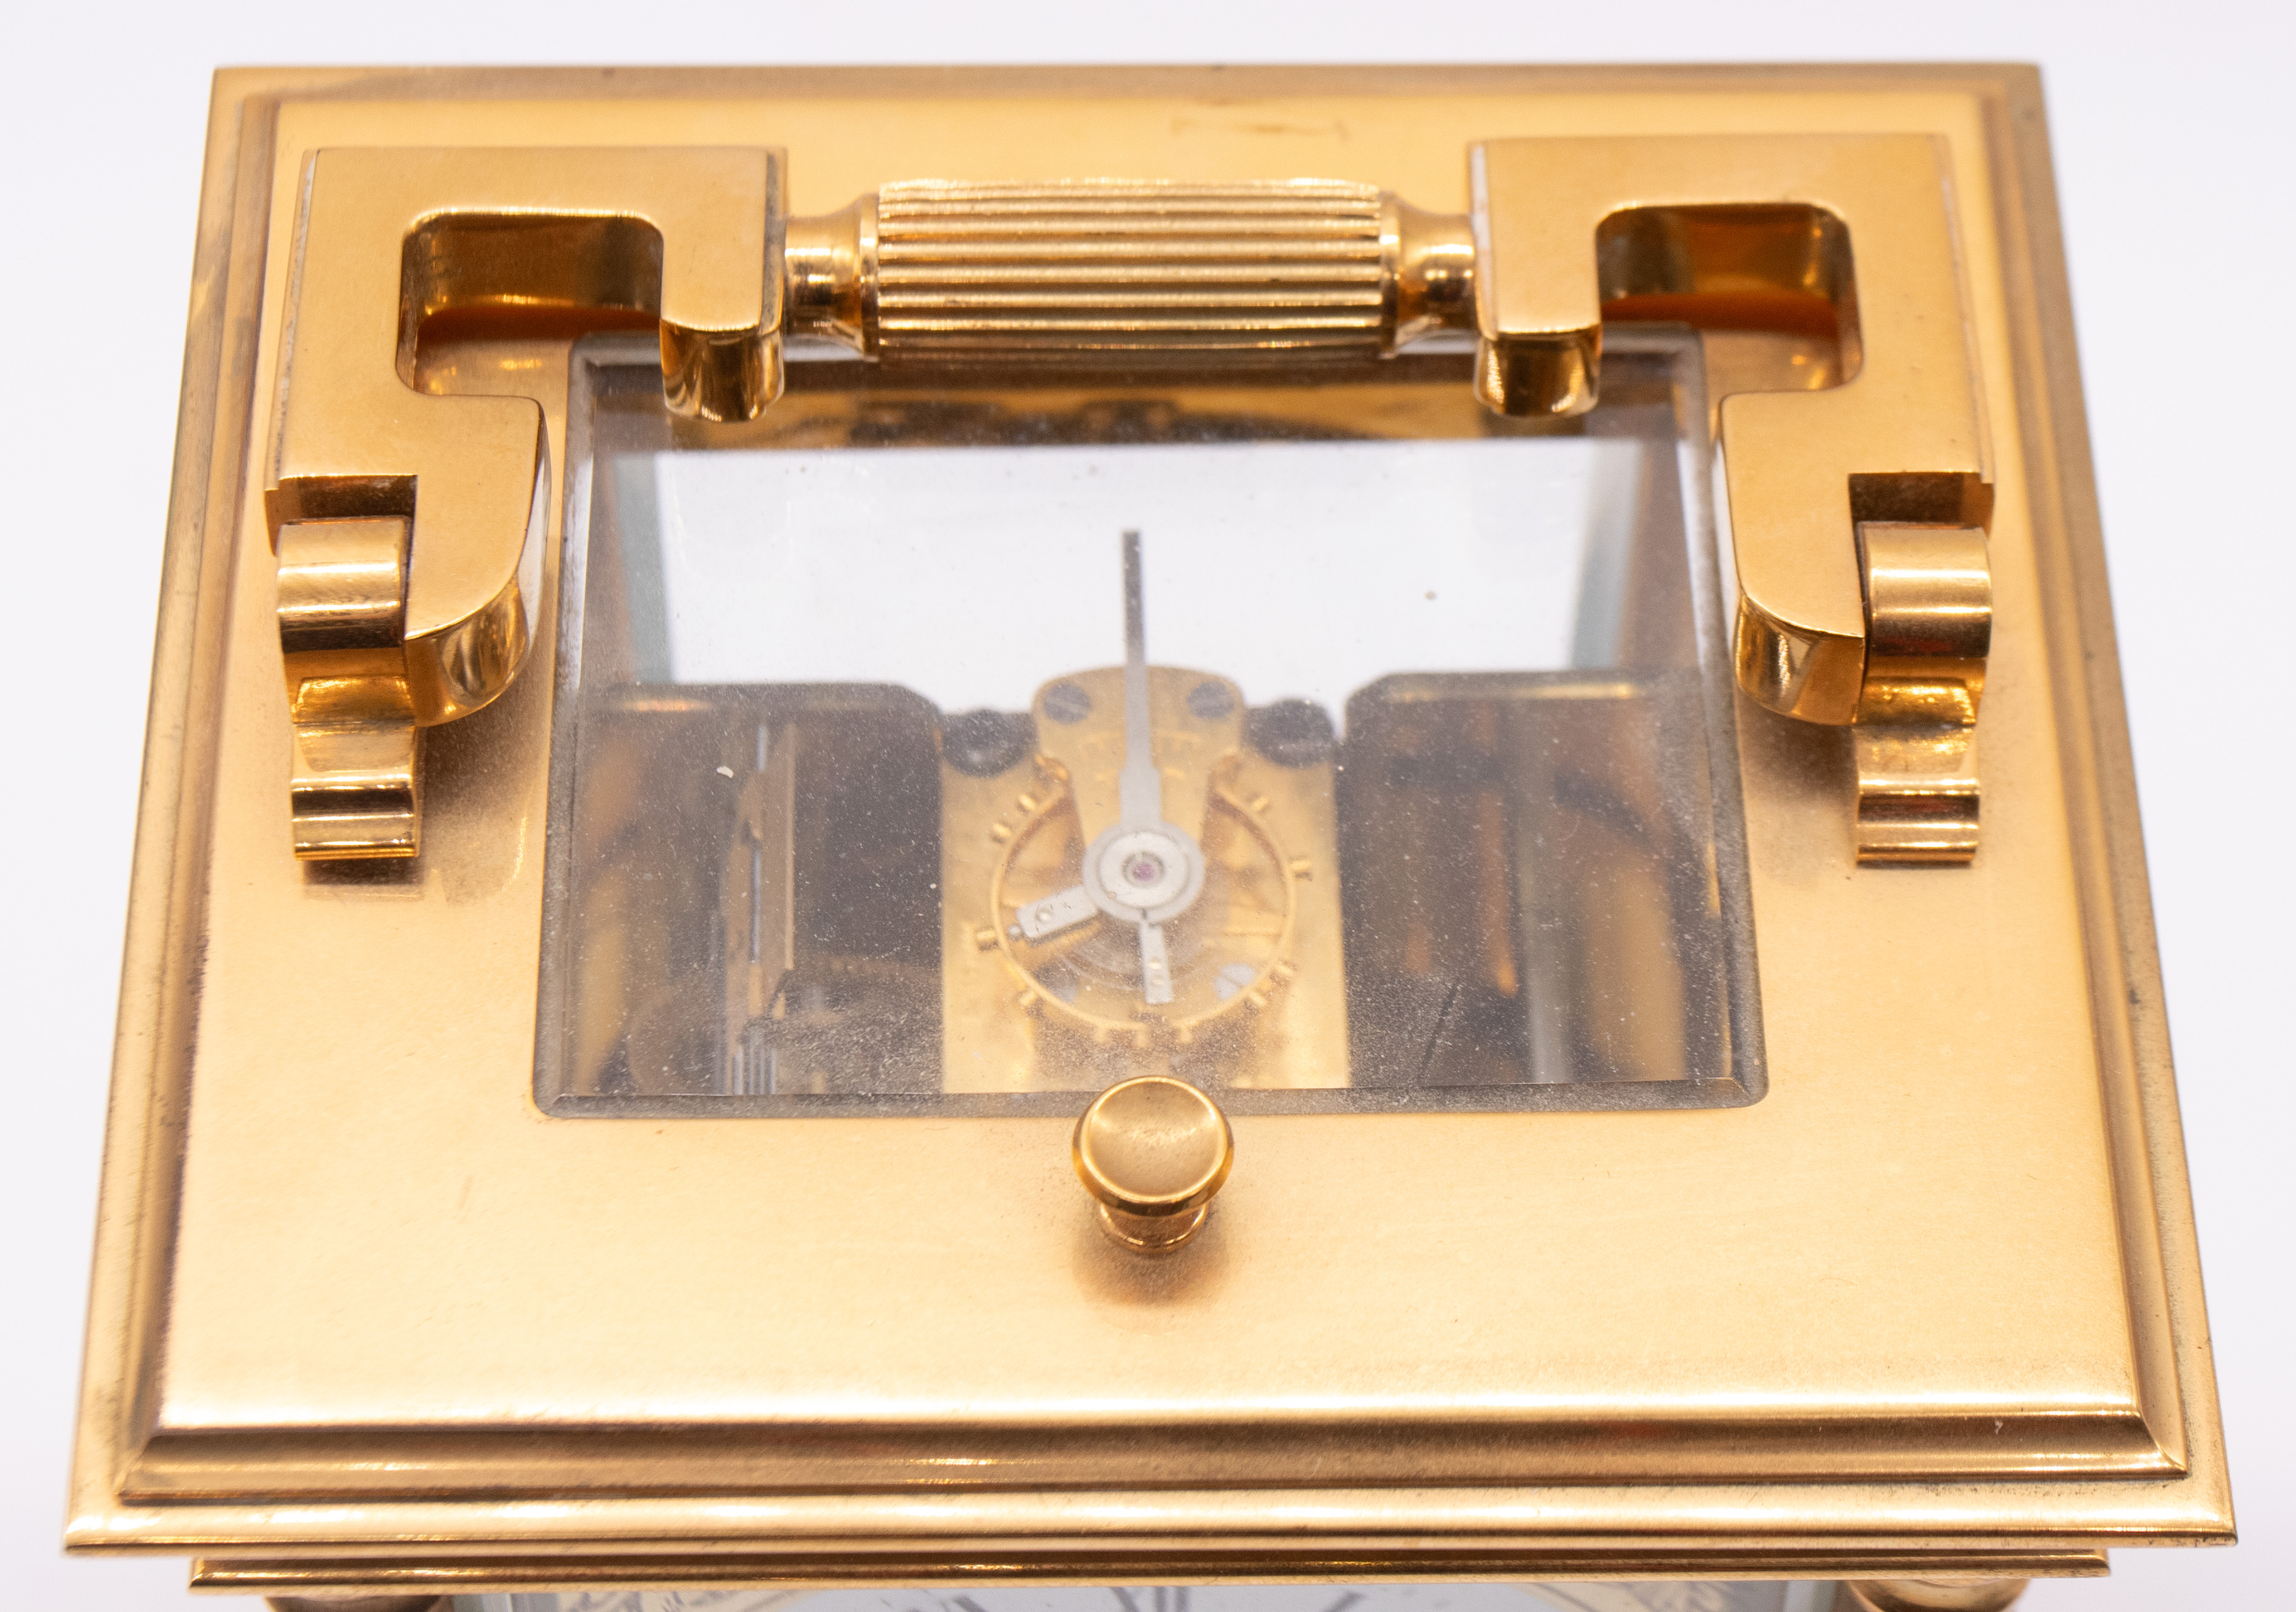 Charles Frodsham London repeating brass carriage clock with eight day two train spring driven - Image 6 of 6